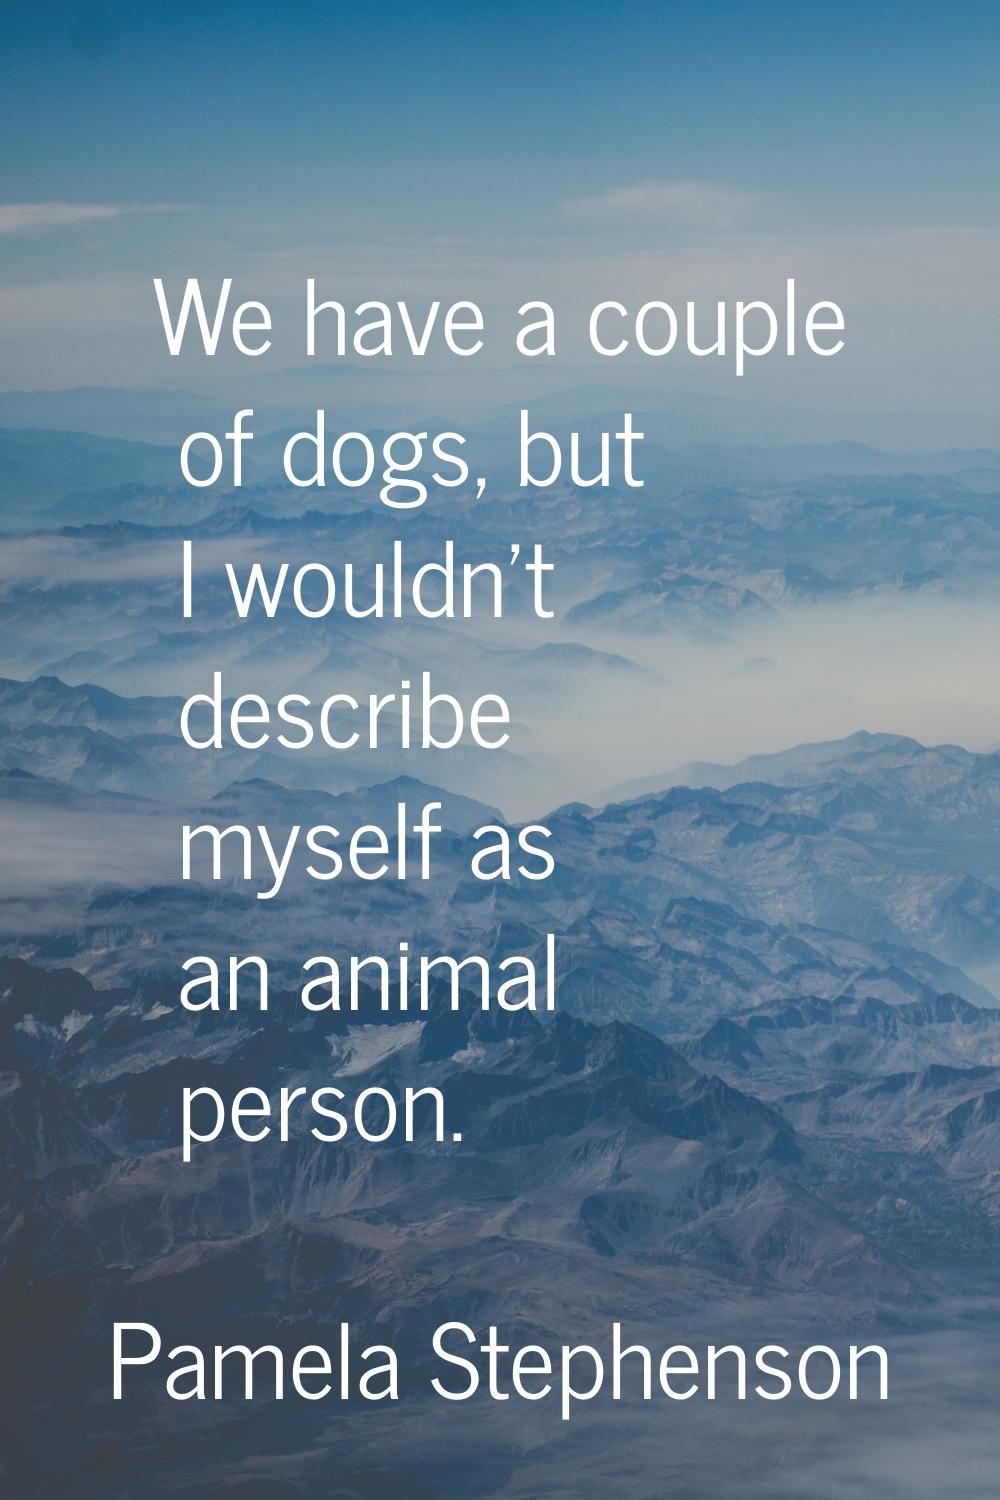 We have a couple of dogs, but I wouldn't describe myself as an animal person.